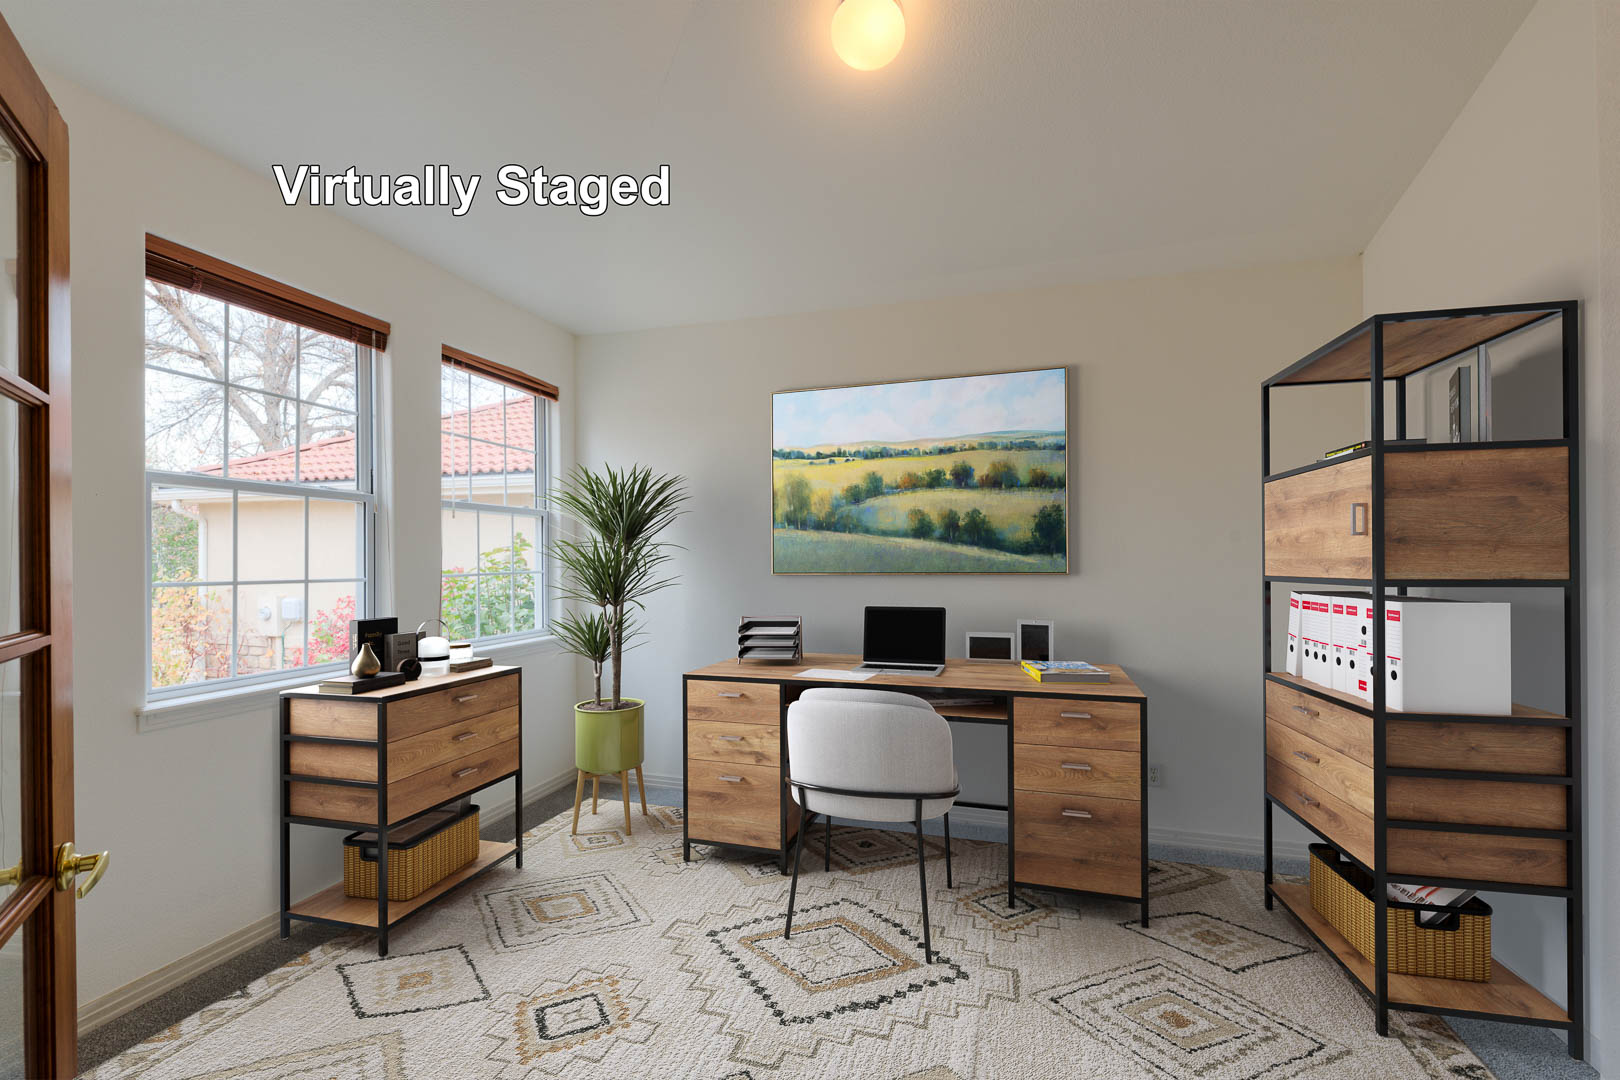 09a 2987s 17a Office1 5TMDE RVT3 AD 28 010 23 20 59 Print Web - Virtual Staging